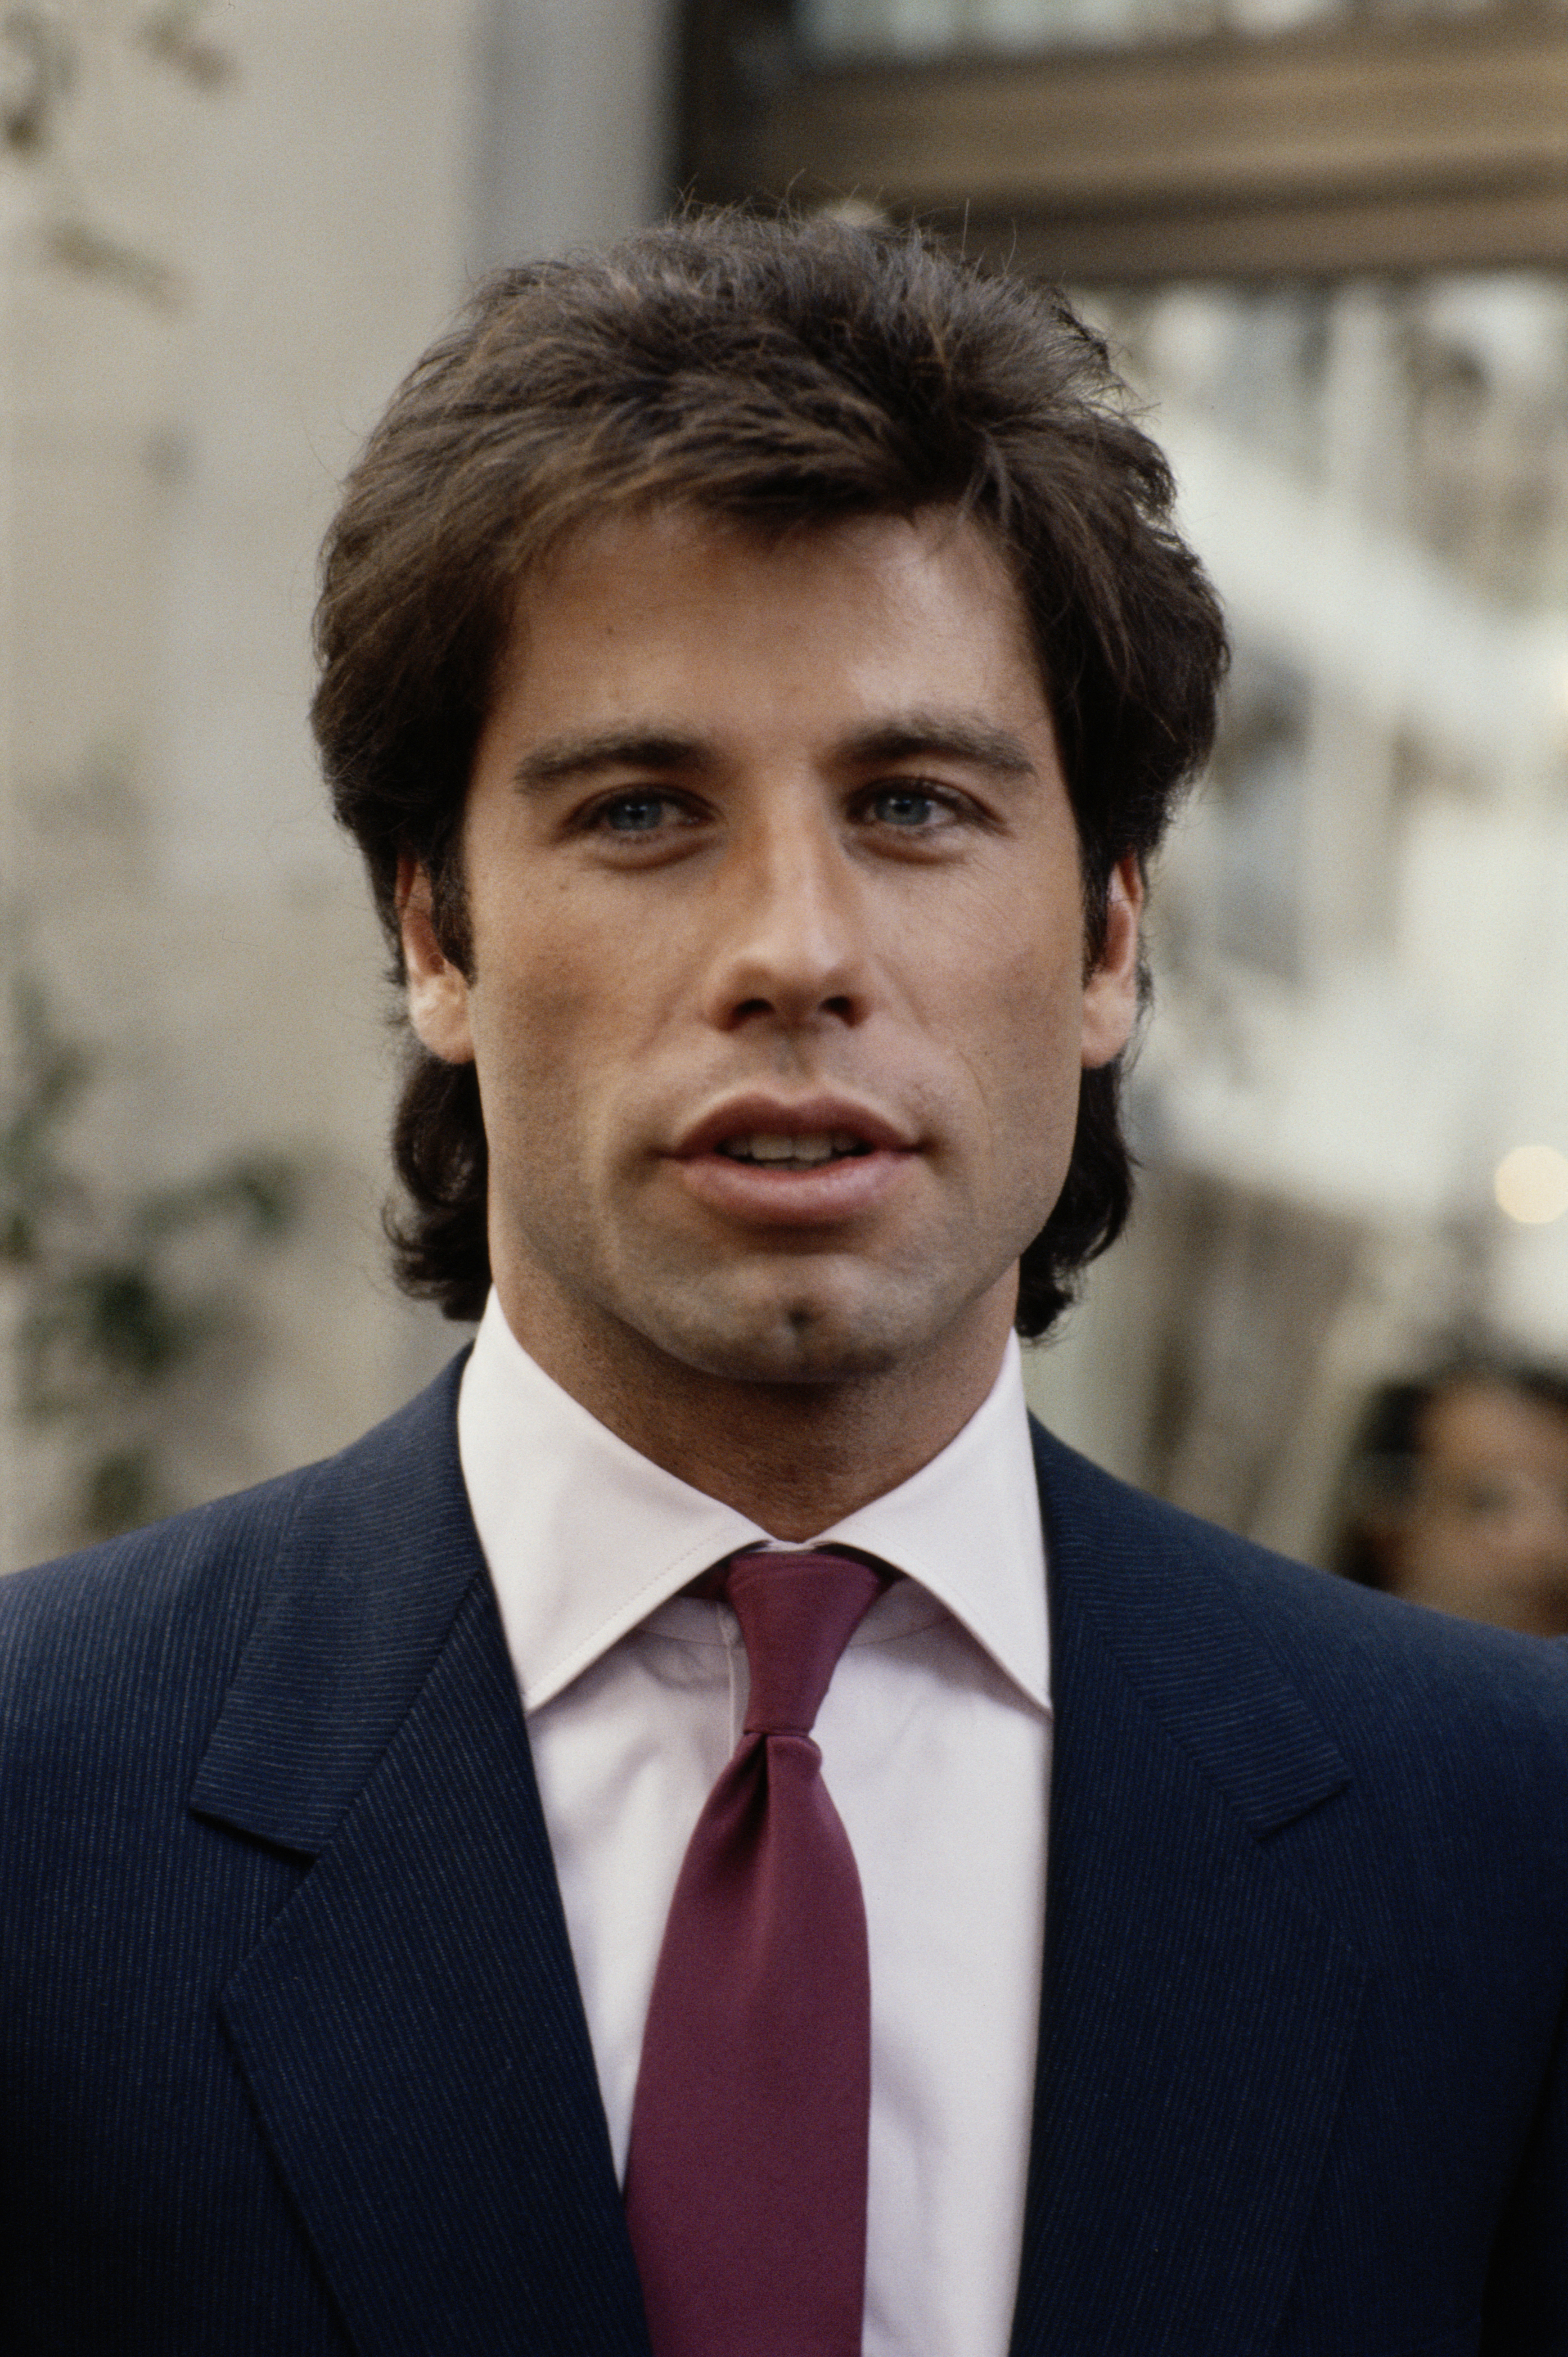 John Travolta during the promotion of his film "Staying Alive" in London, England in 1983 | Source: Getty Images